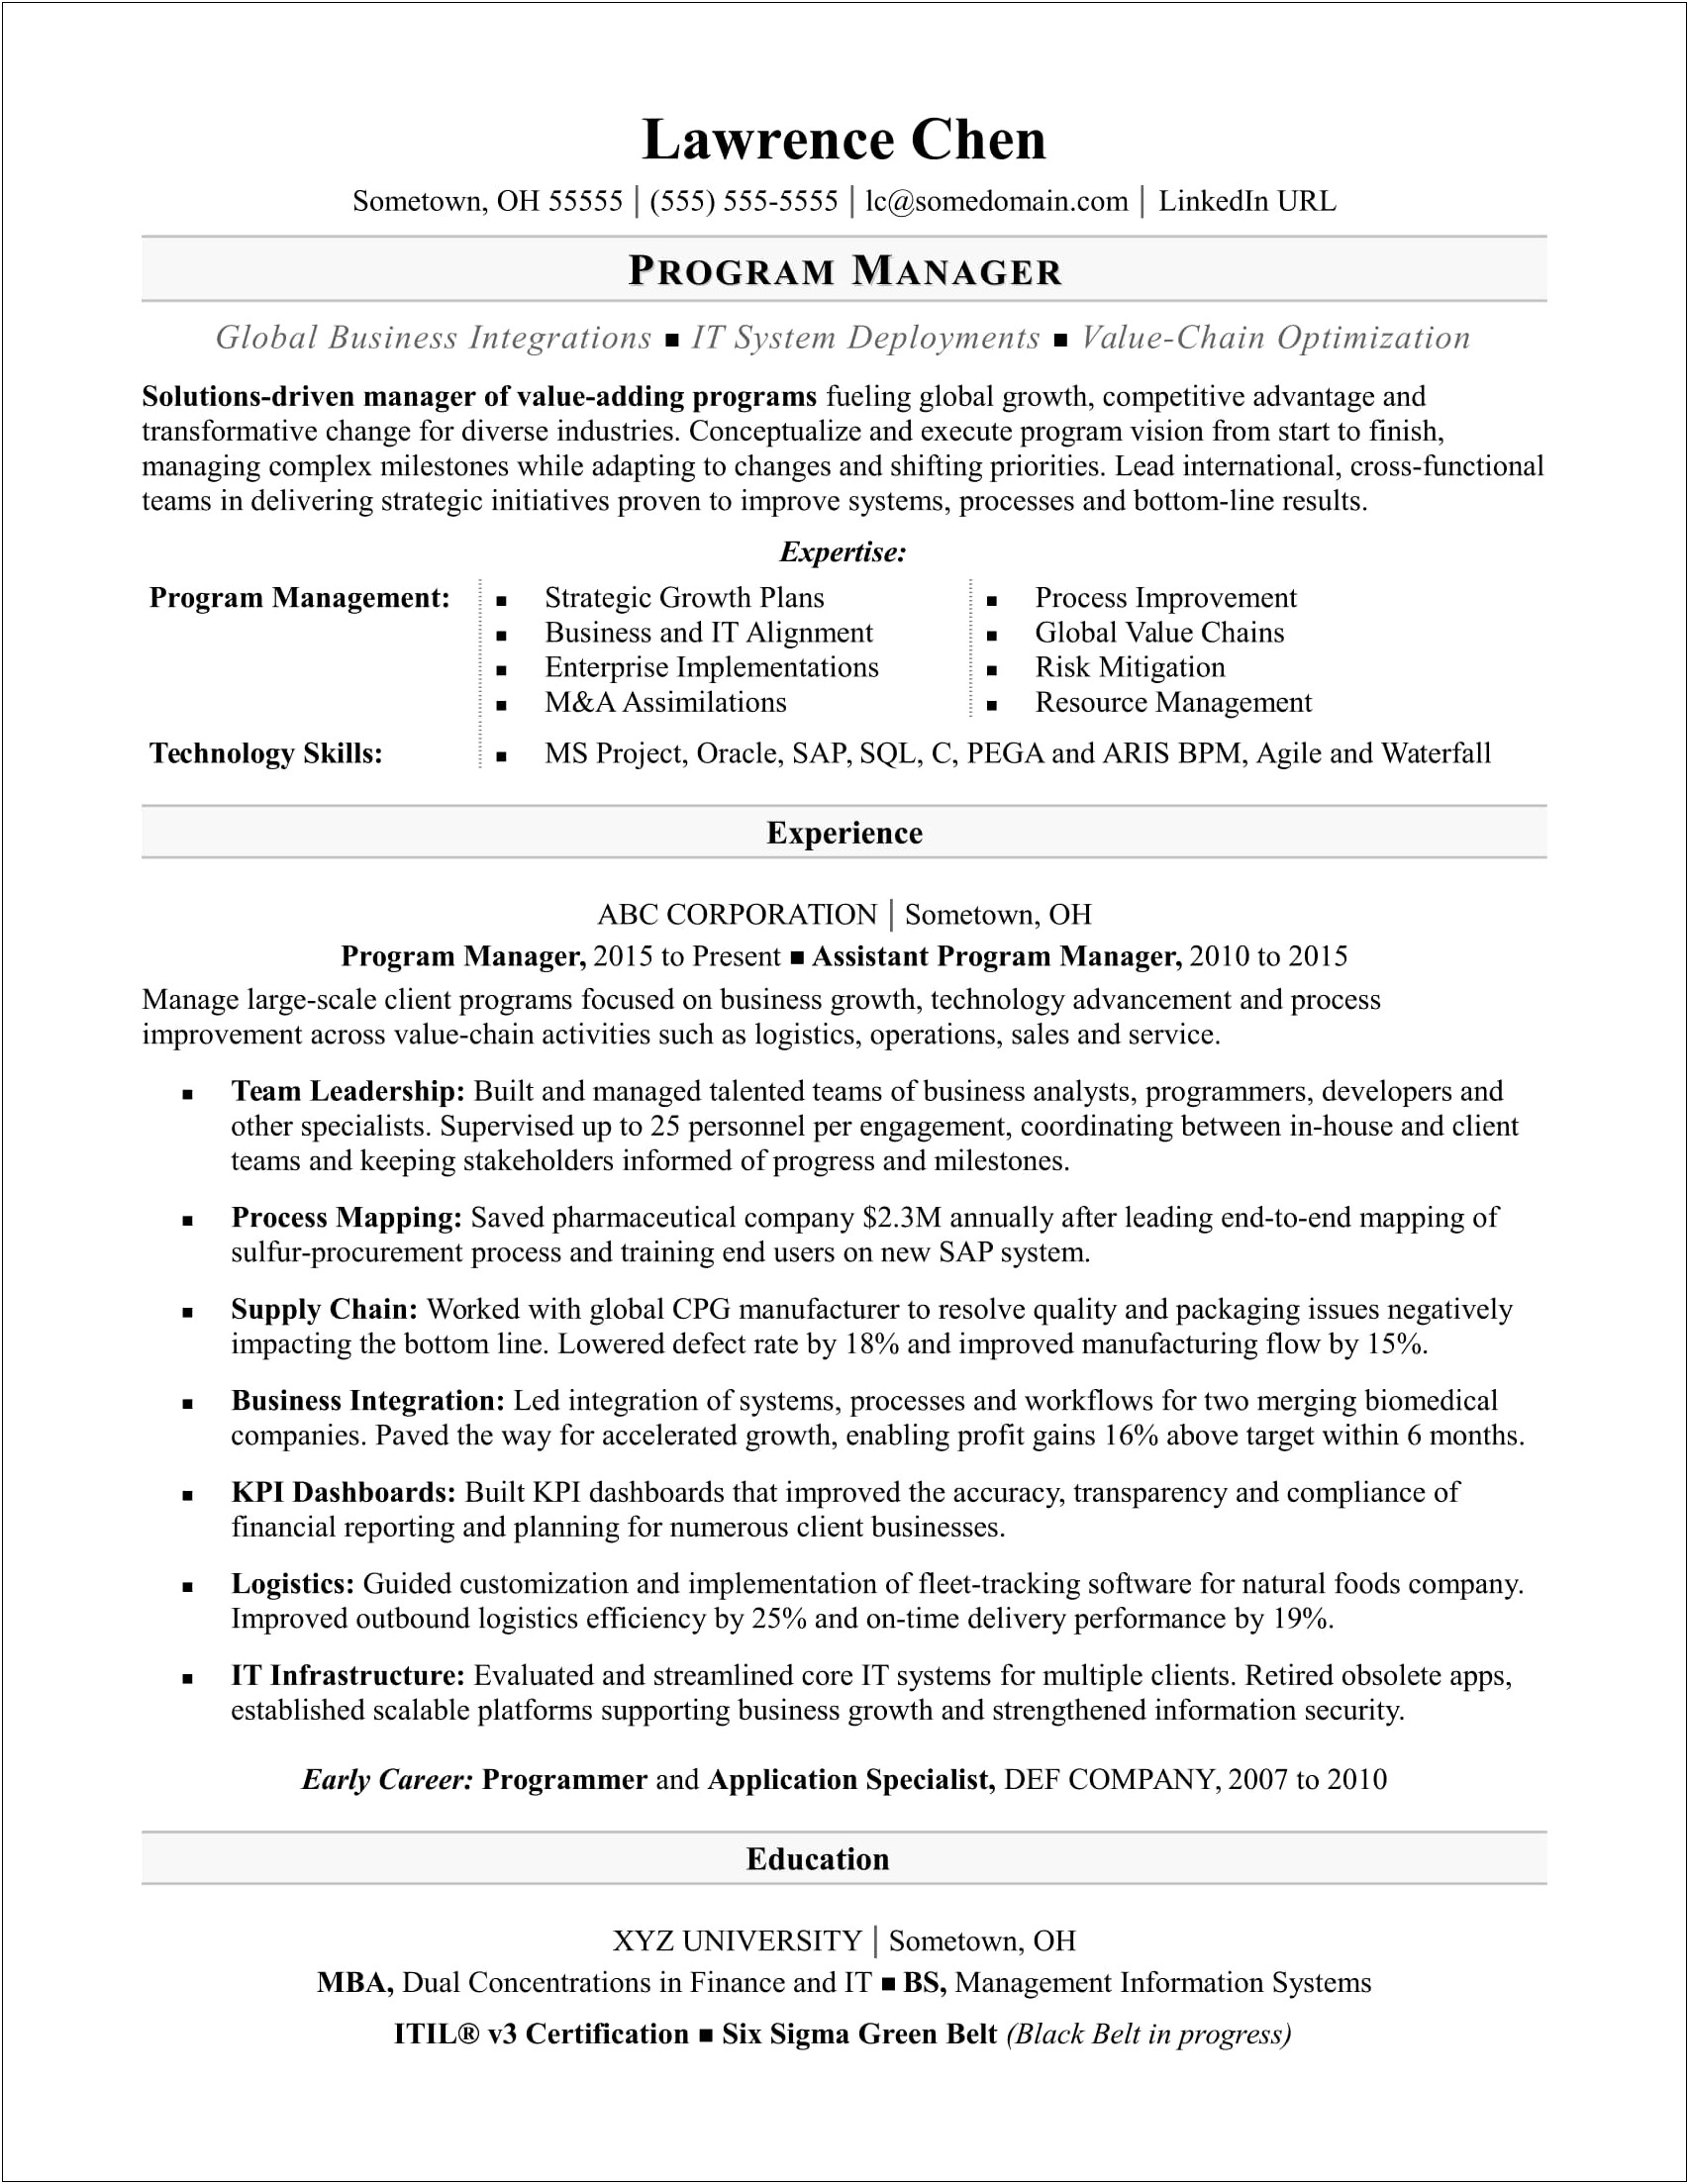 Diversity And Inclusion Program Manager Resume